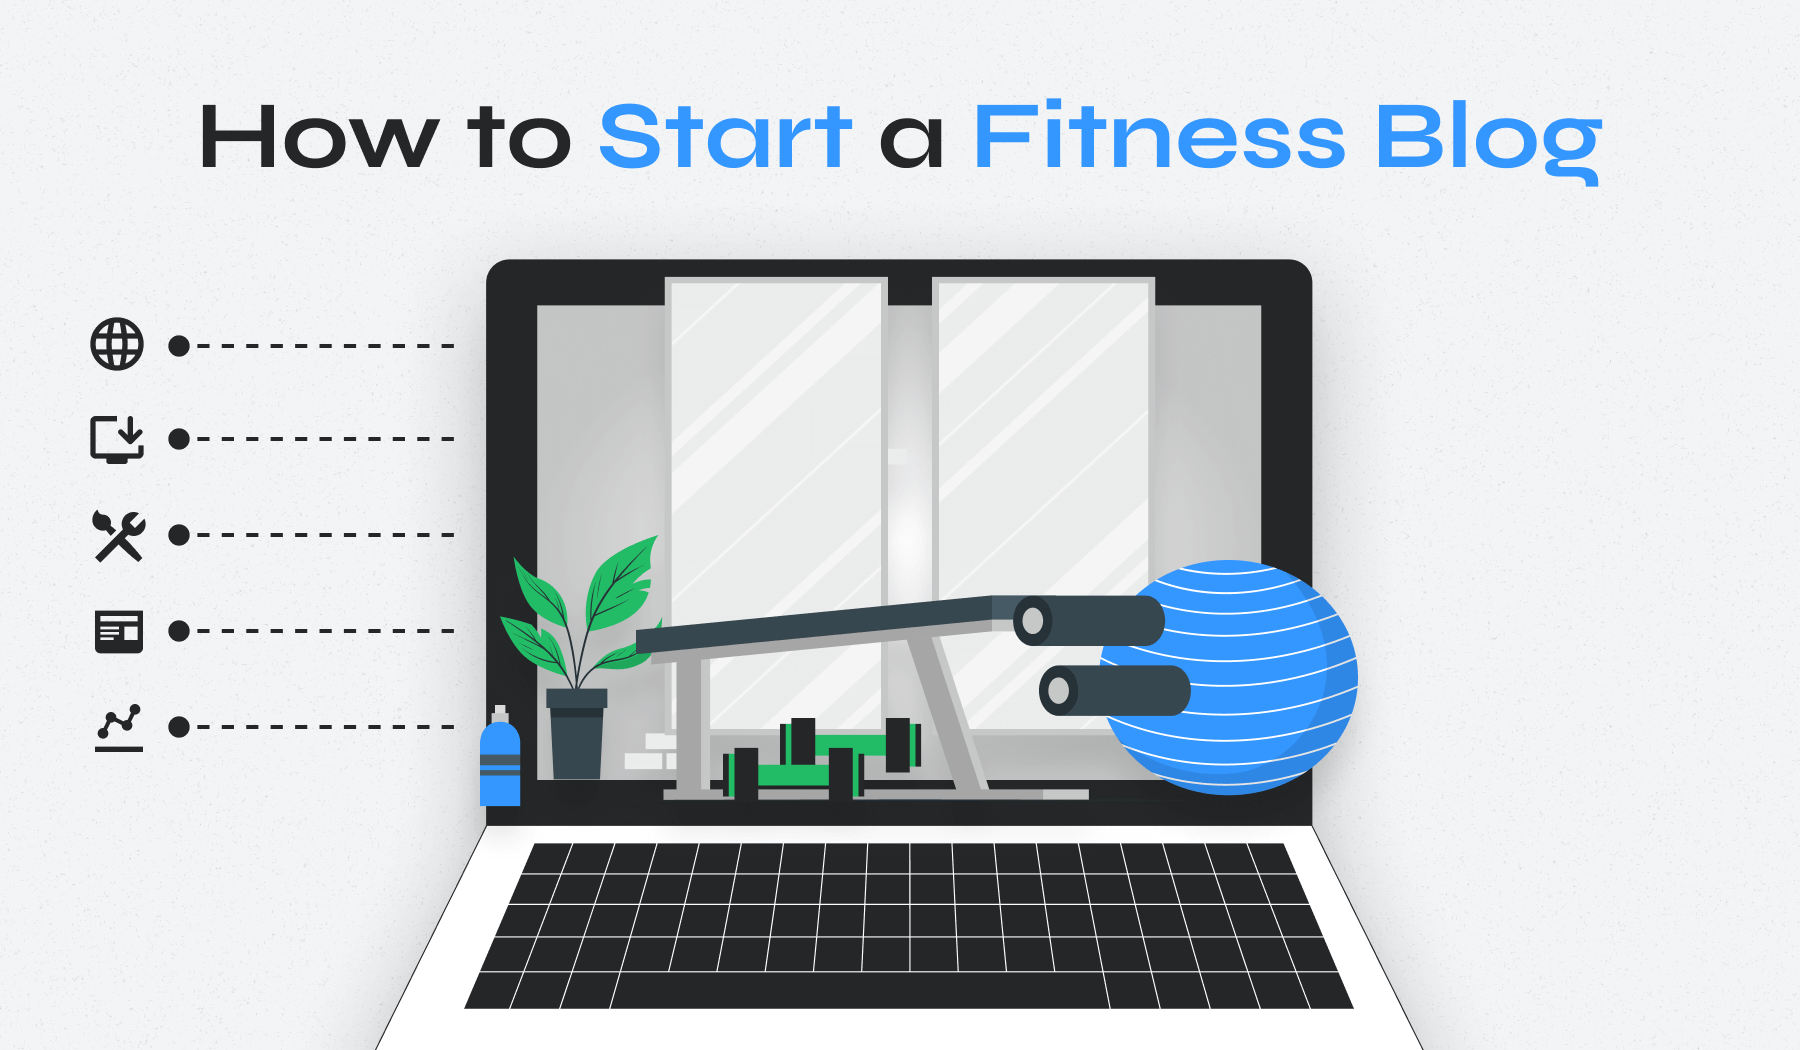 How to Start a Fitness Blog